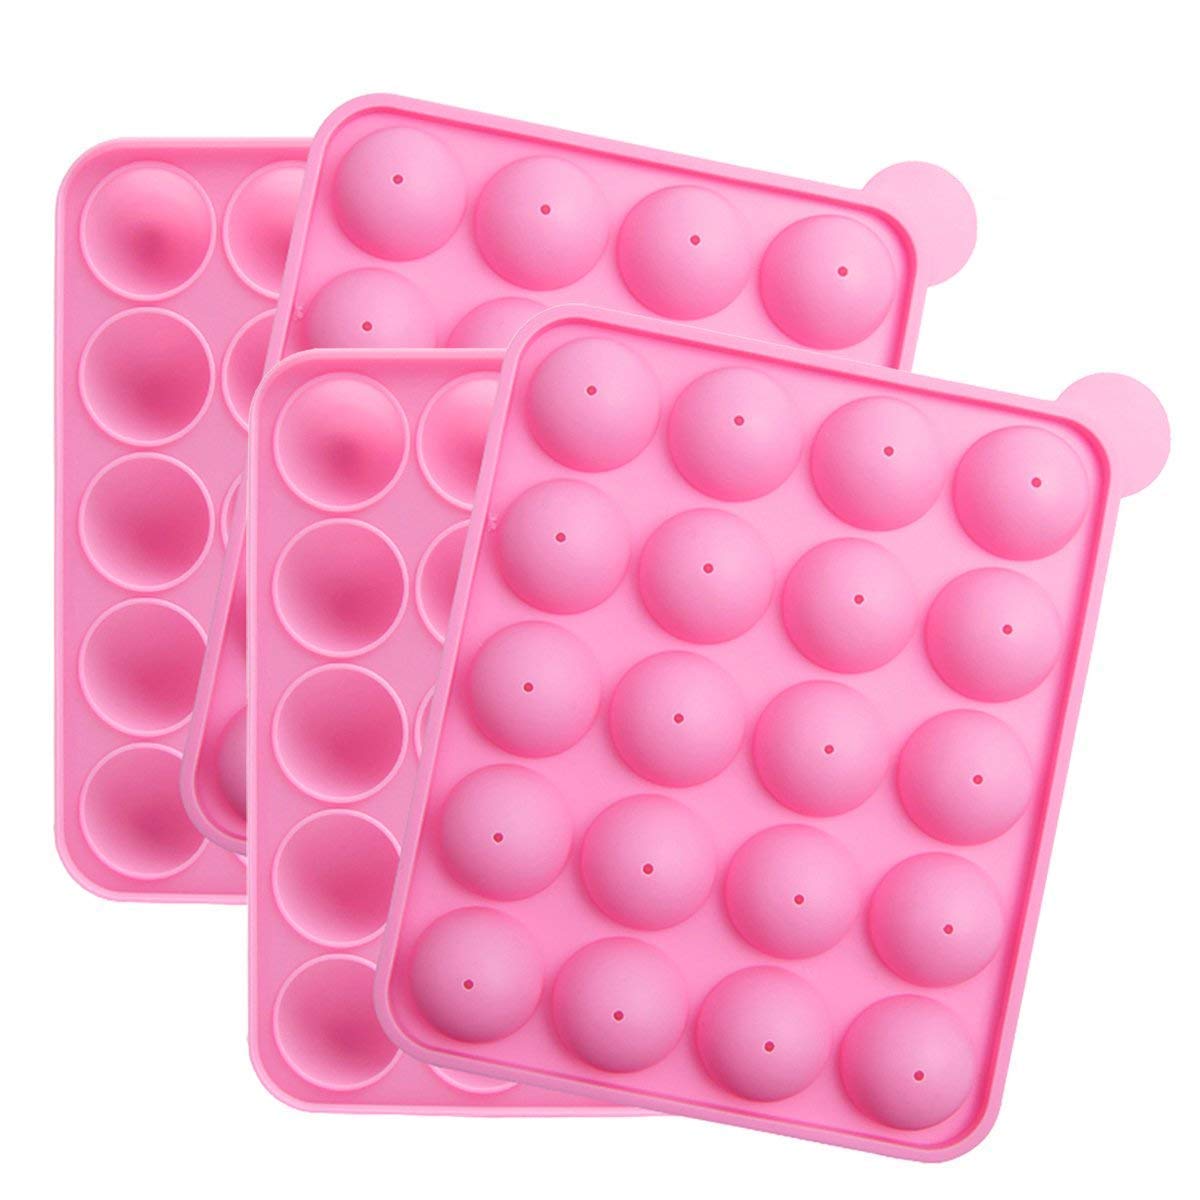 Tosnail 2 Pack of 20-Cavity Silicone Cake Pop Mold - Great for Hard Candy, Lollipop and Party Cupcake